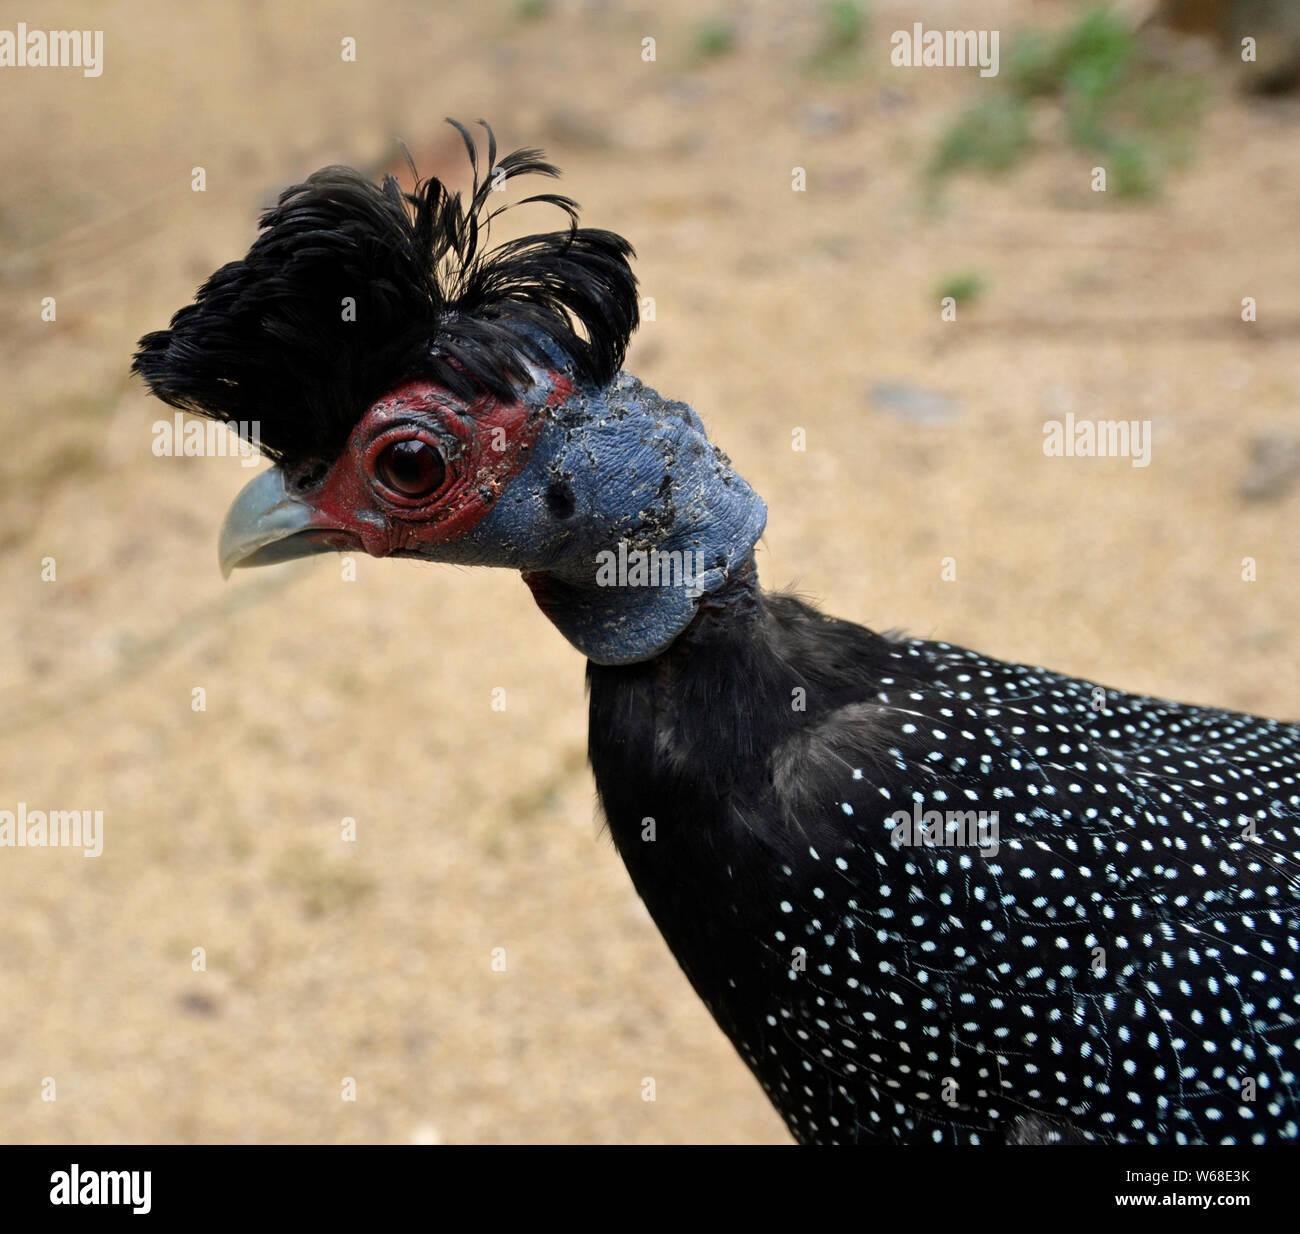 Kenyan or African Crested guineafowl at Cotswold Wildlife Park, Oxfordshire, UK Stock Photo